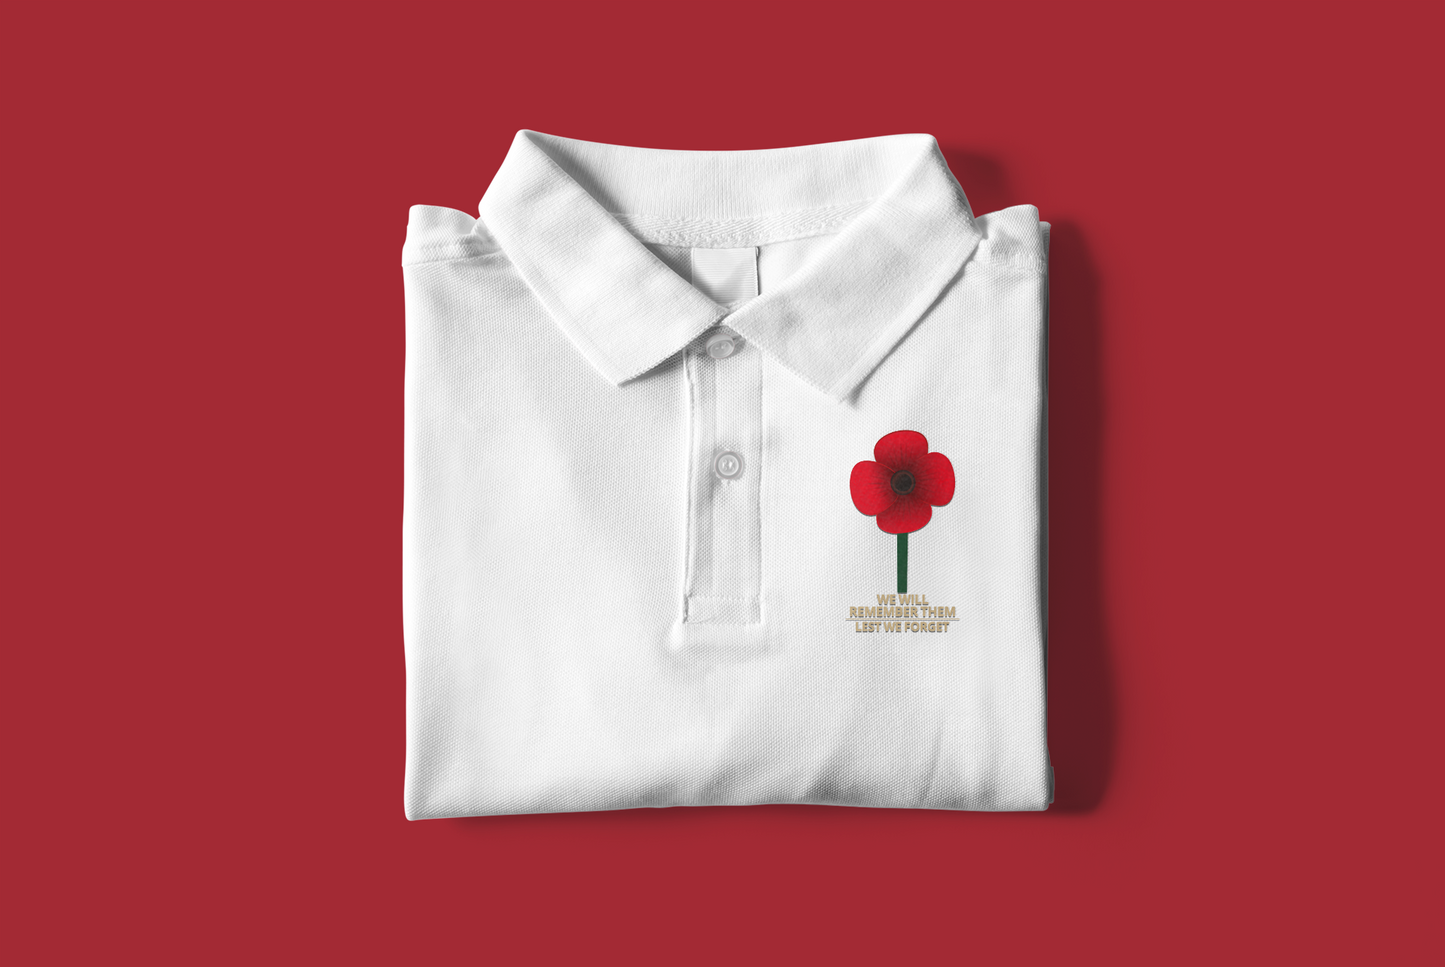 Anzac - We Will Remember Them, Lest We Forget - Polo Tee Shirt